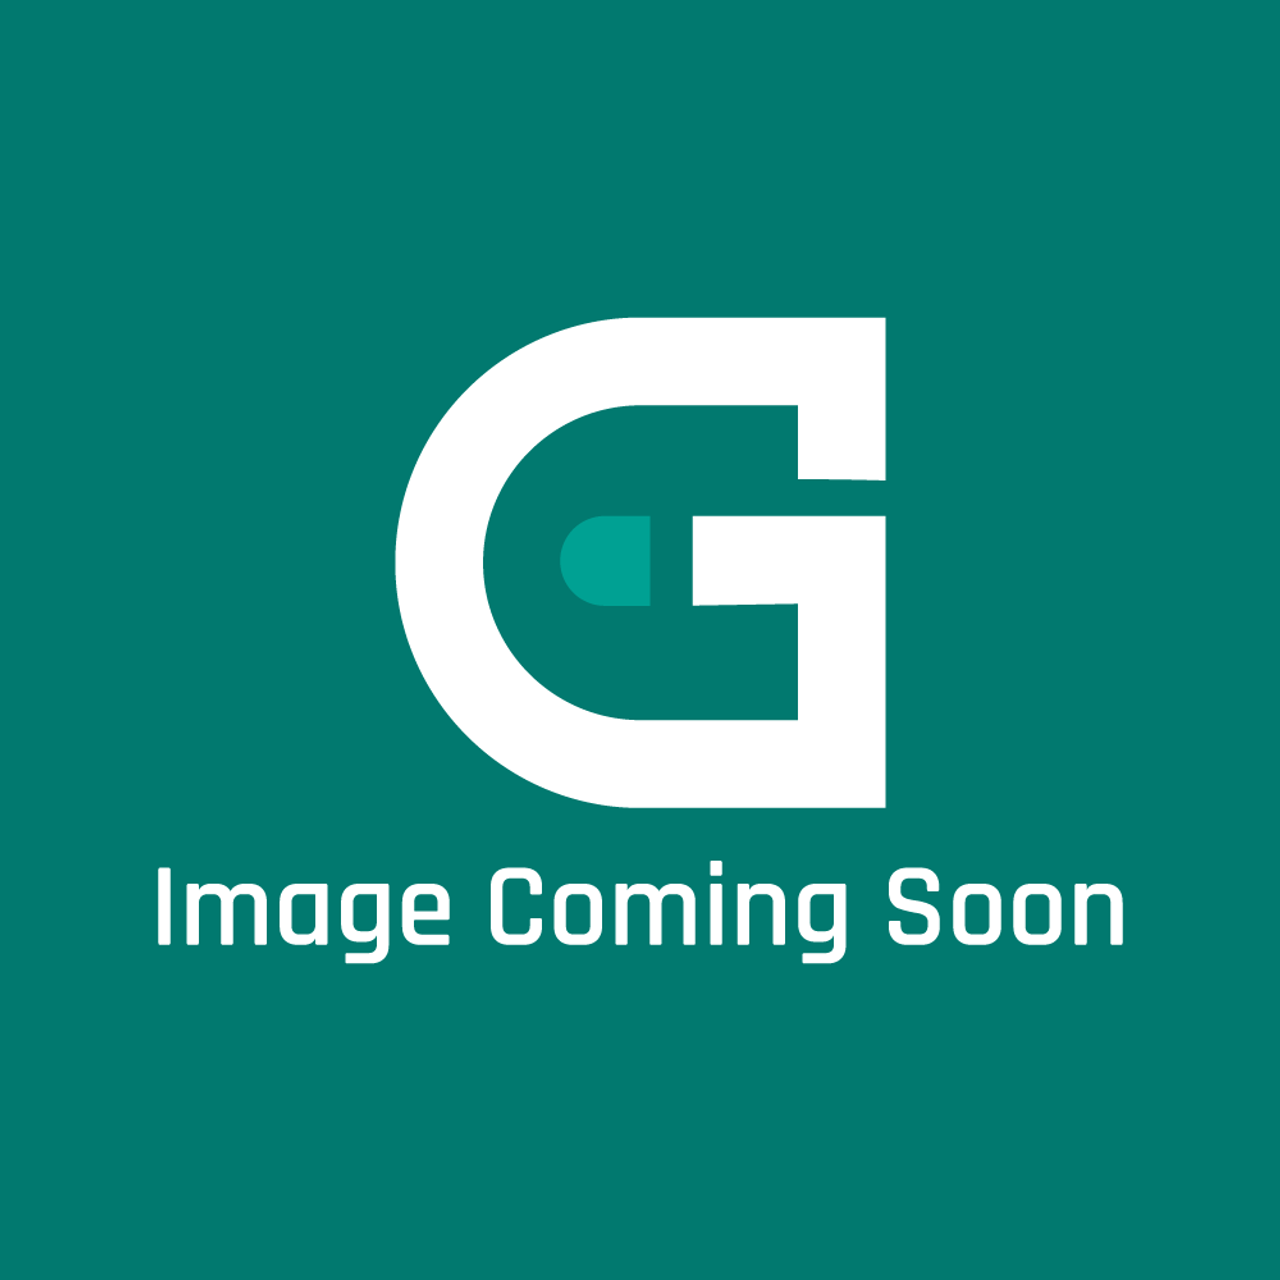 Frigidaire - Electrolux 240505803 Switch - Image Coming Soon!